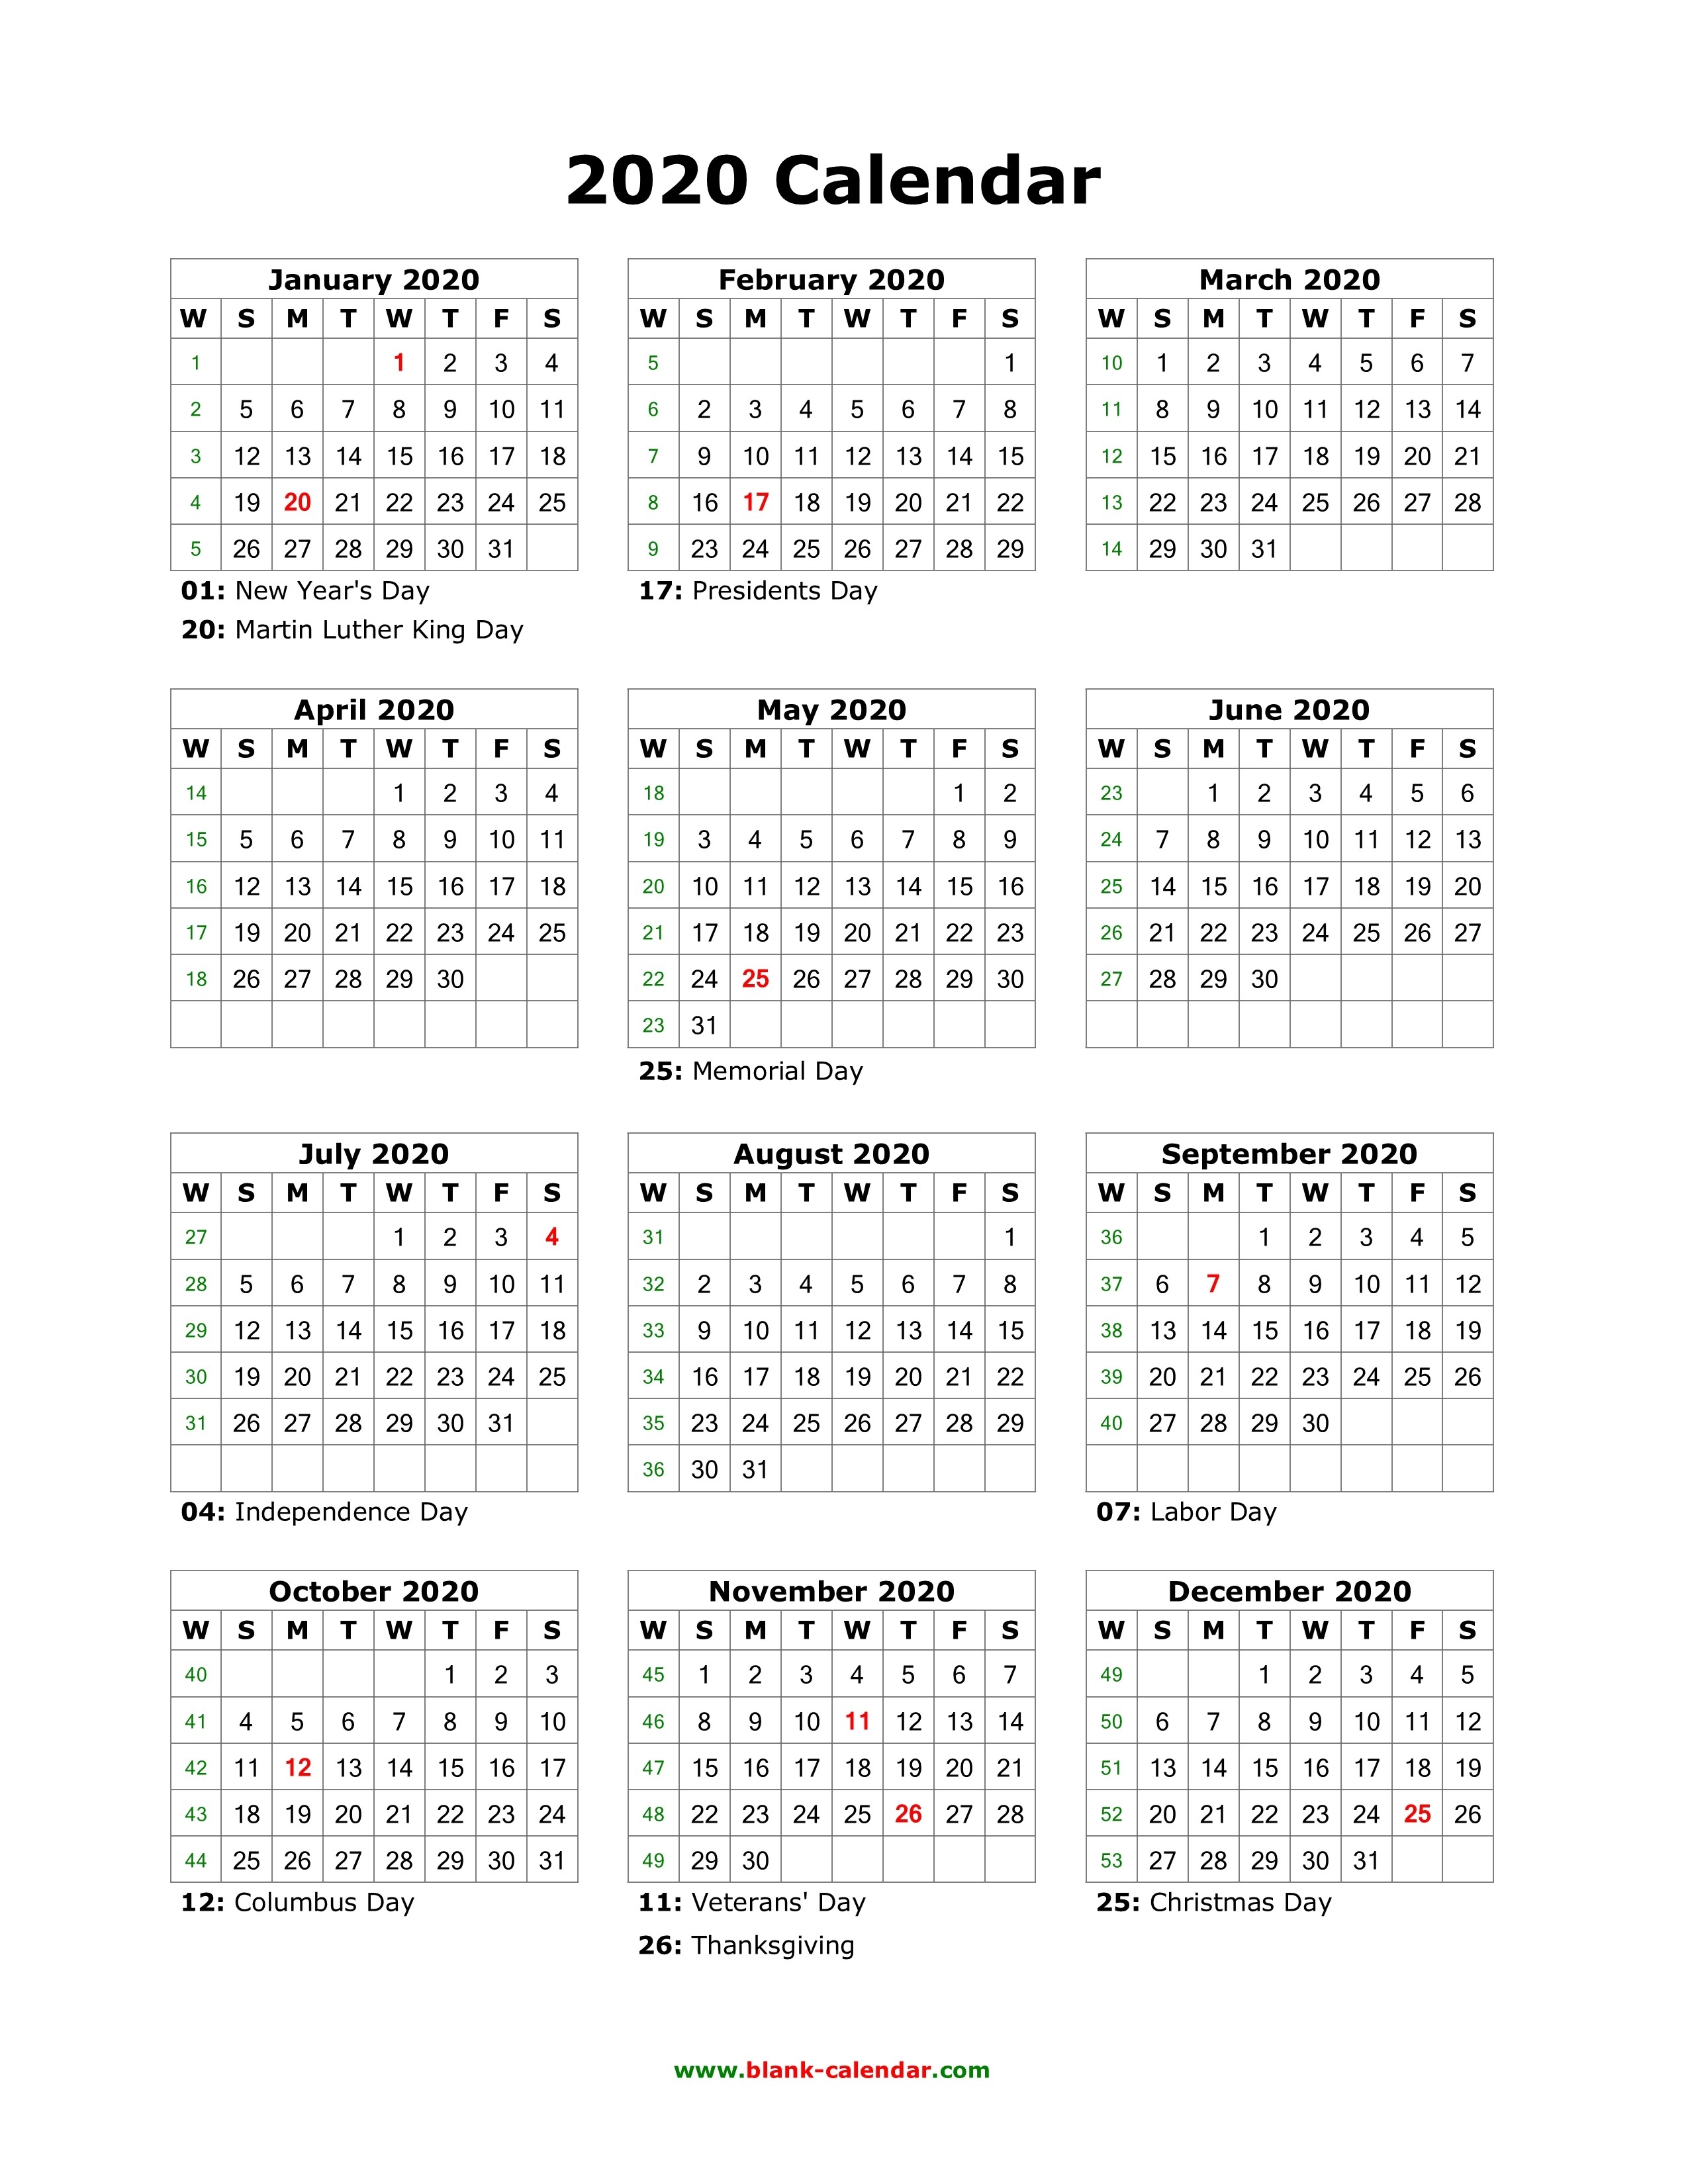 Download Blank Calendar 2020 With Us Holidays (12 Months On-2020 Calendar Us Holidays